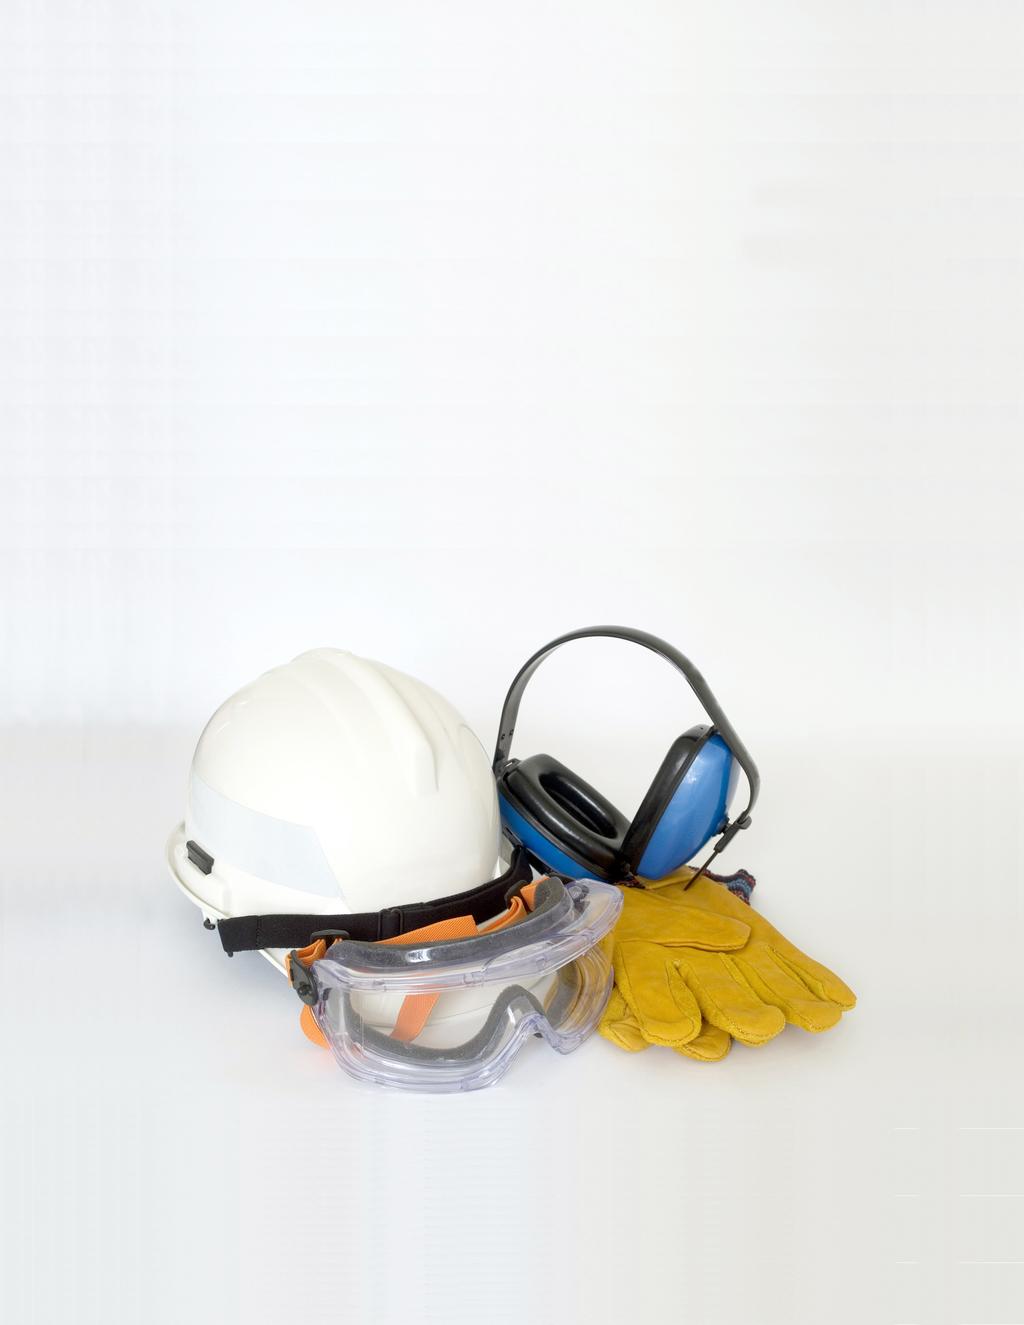 Fourth Edition PERSONAL PROTECTIVE EQUIPMENT Compiled by: The AFS Safety & Health